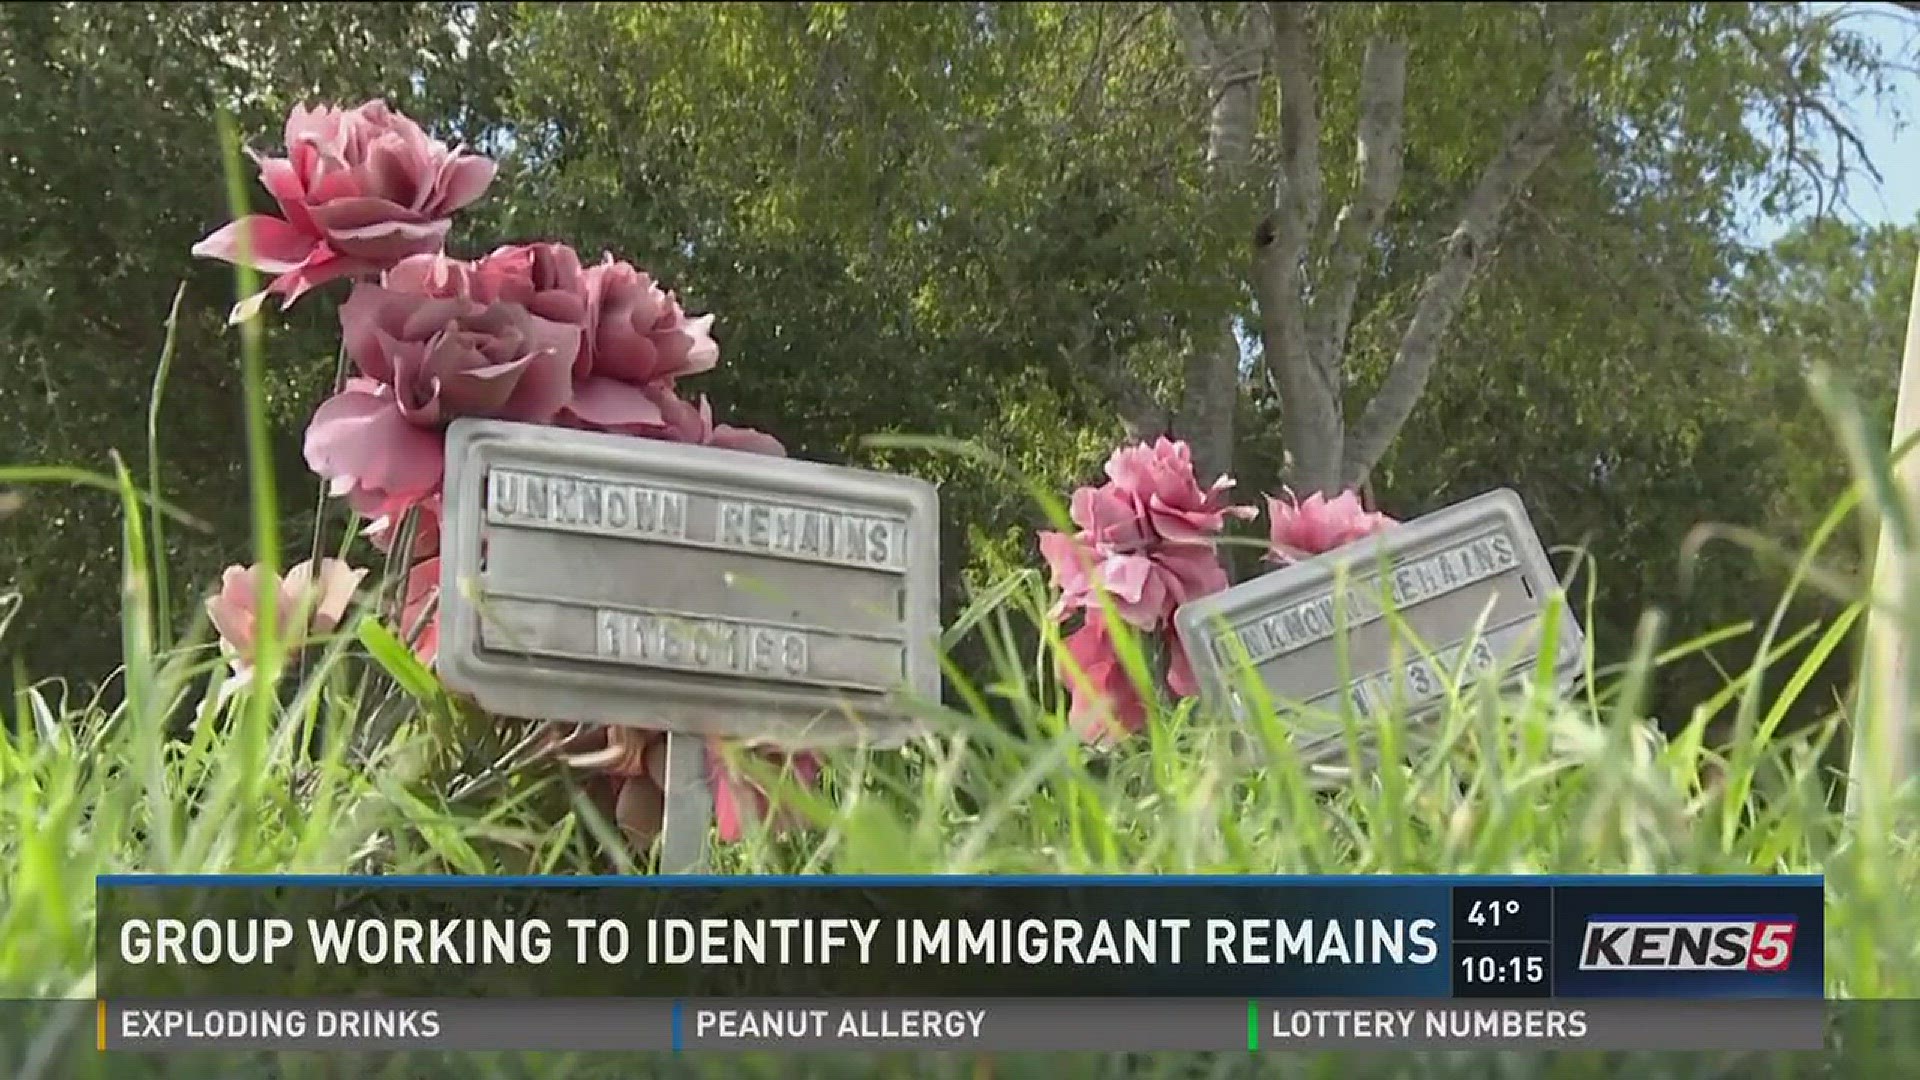 Group working to identify immigrant remains